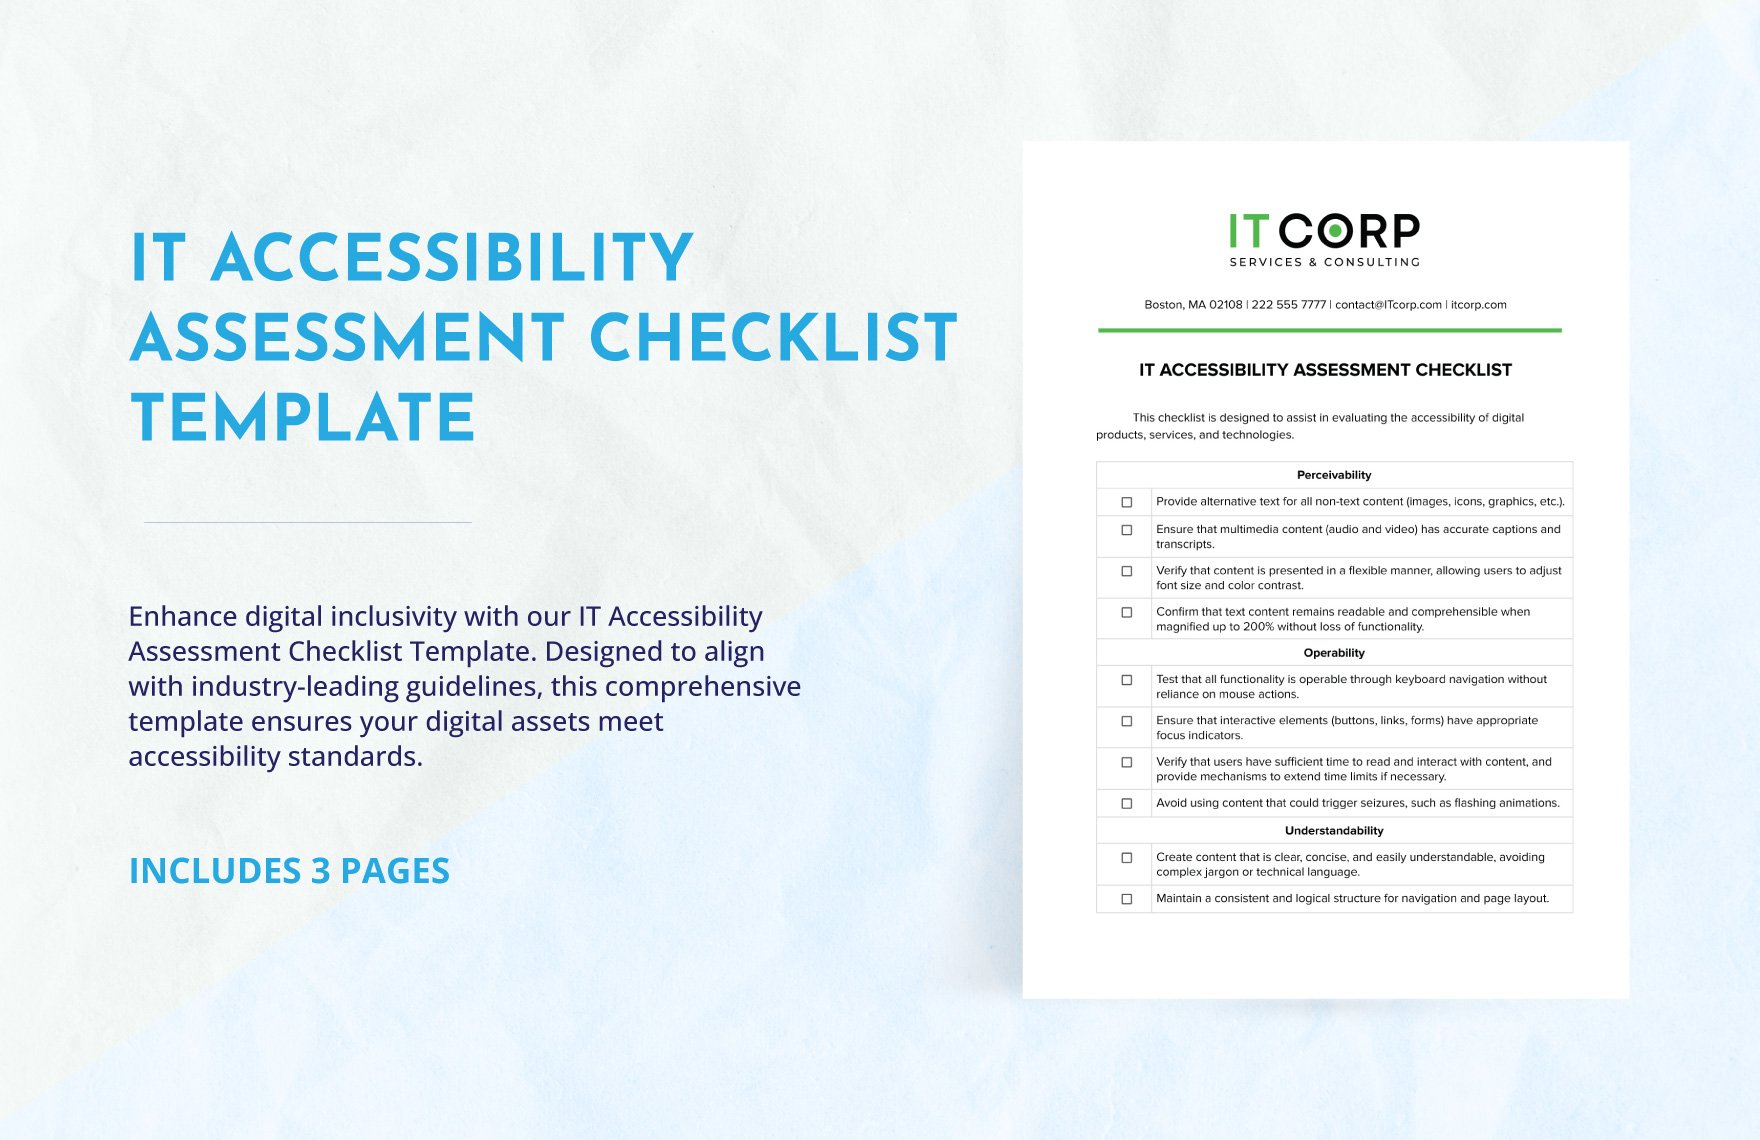 IT Accessibility Assessment Checklist Template